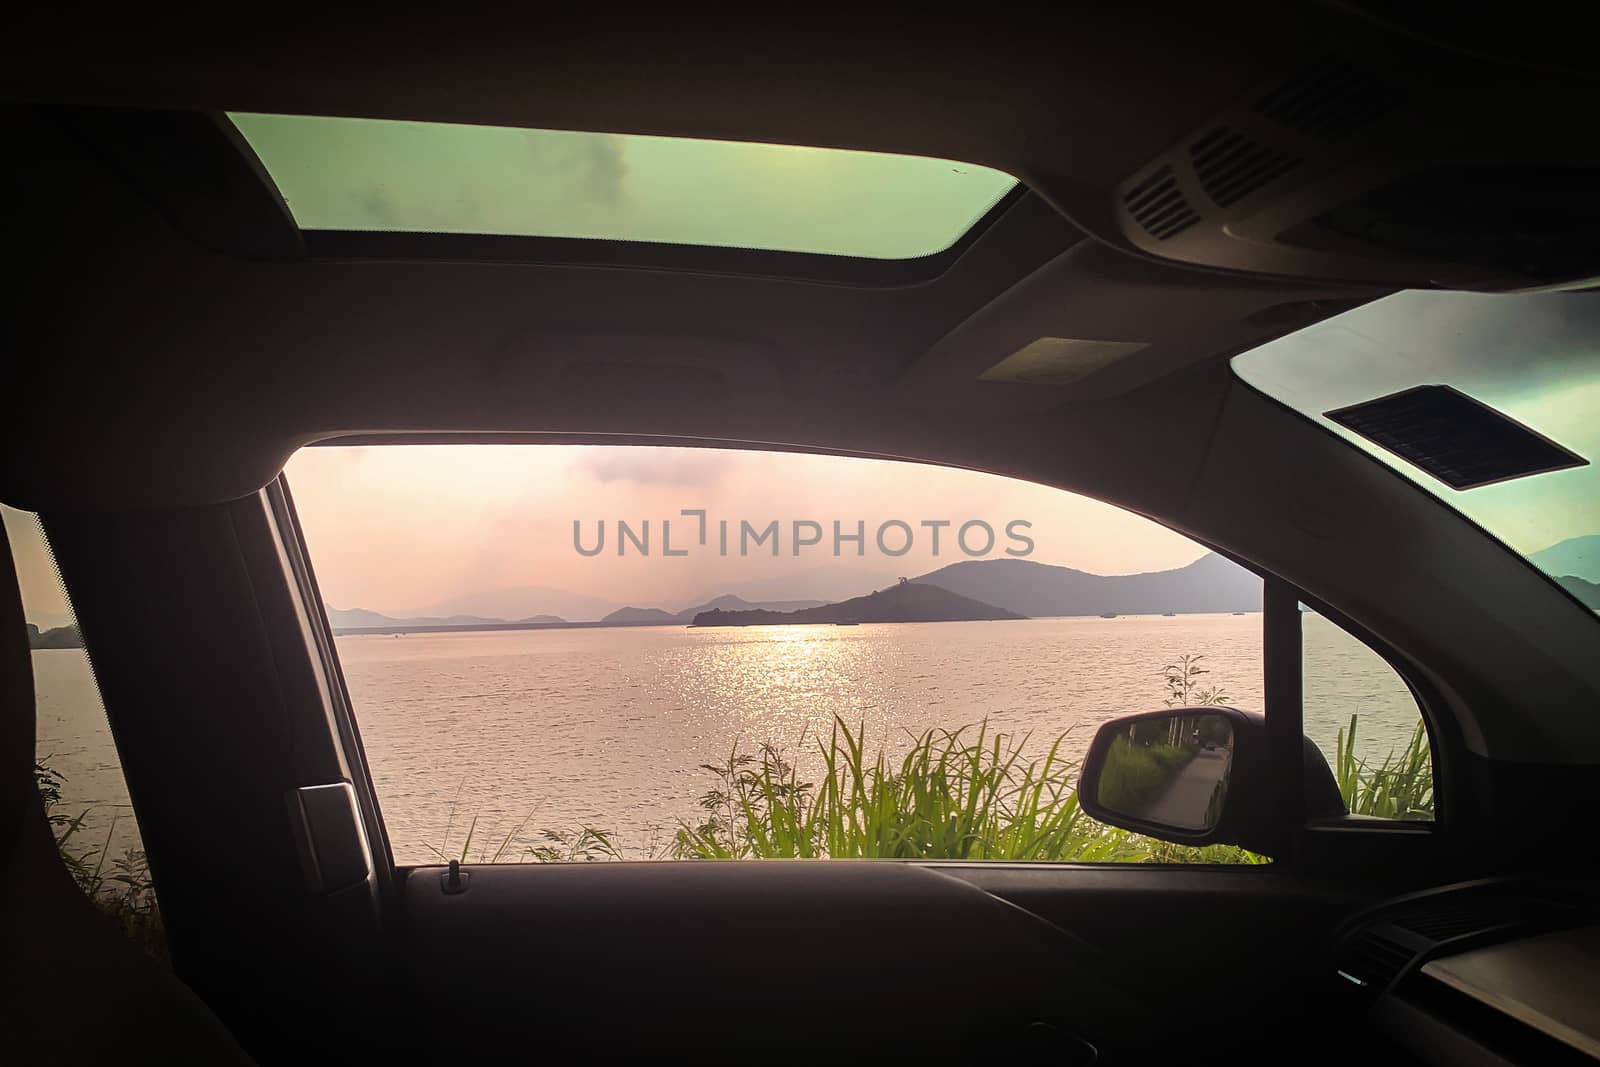 Interior car, mirror, sunroof, ocean, with sunlight reflection a by cougarsan